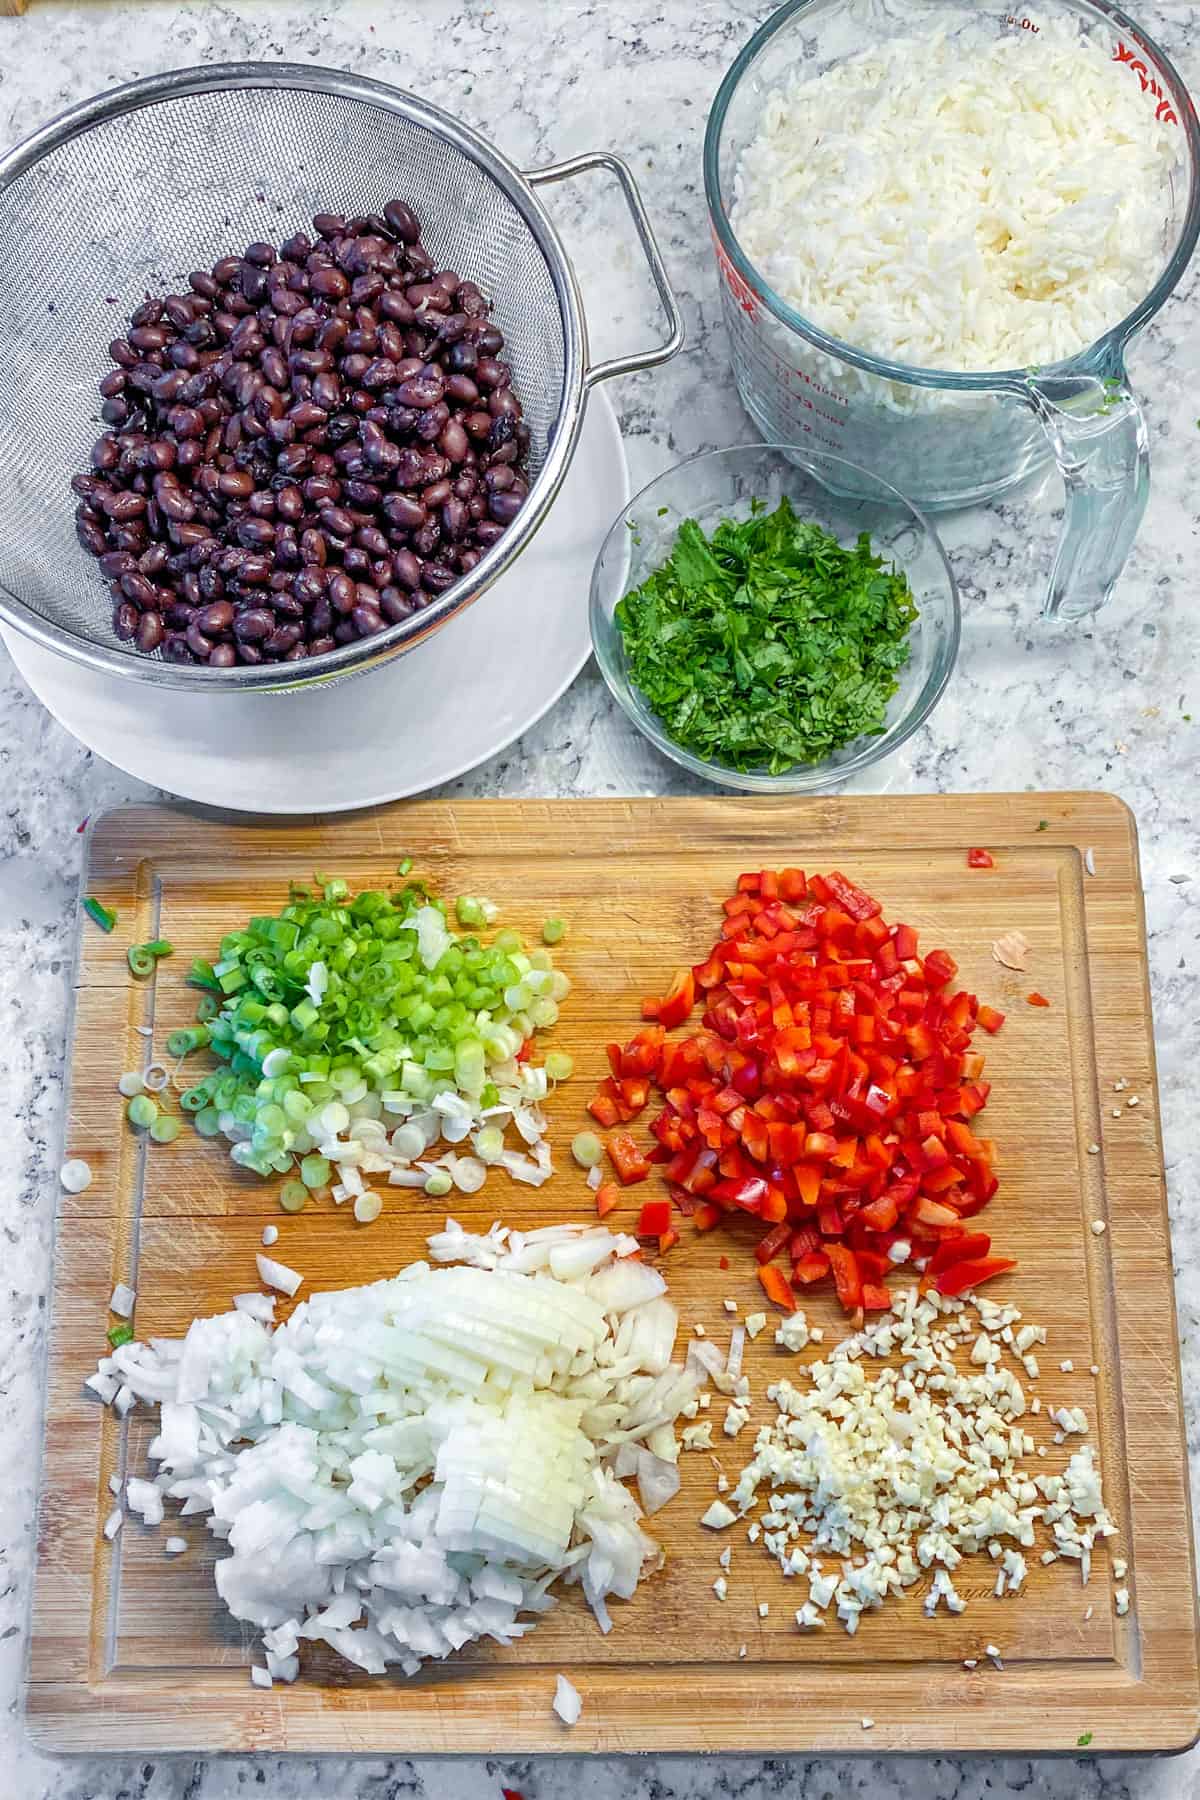 ingredients for gallo pinto chopped and on a wooden cutting board: onions, red pepper, garlic, scallions, a small bowl of chopped cilantro, a large measuring cup of cooked white rice, a colander filled with black beans